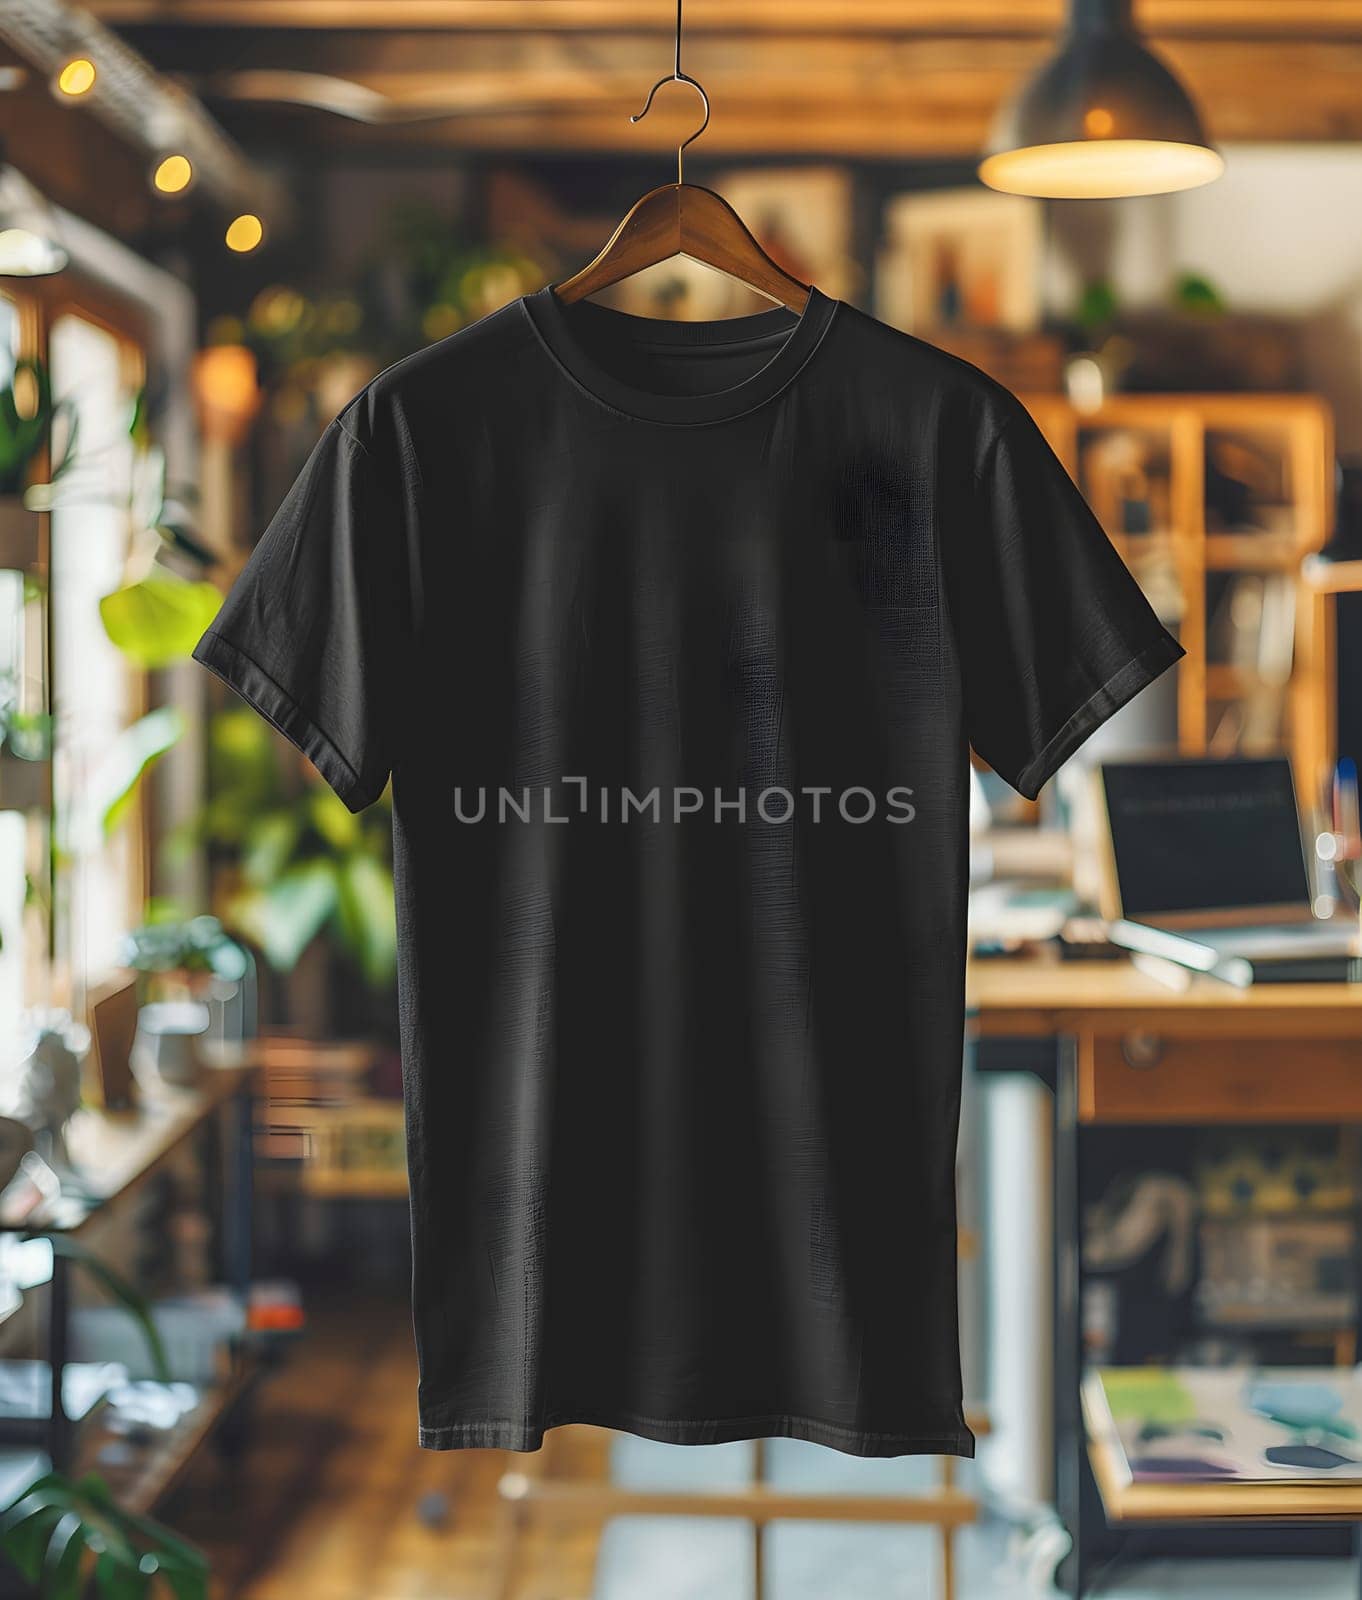 A sleeve black Tshirt, a fashion design of sportswear, is displayed on a clothes hanger in a room, suitable for retail, events, formal wear, uniforms, or active shirts